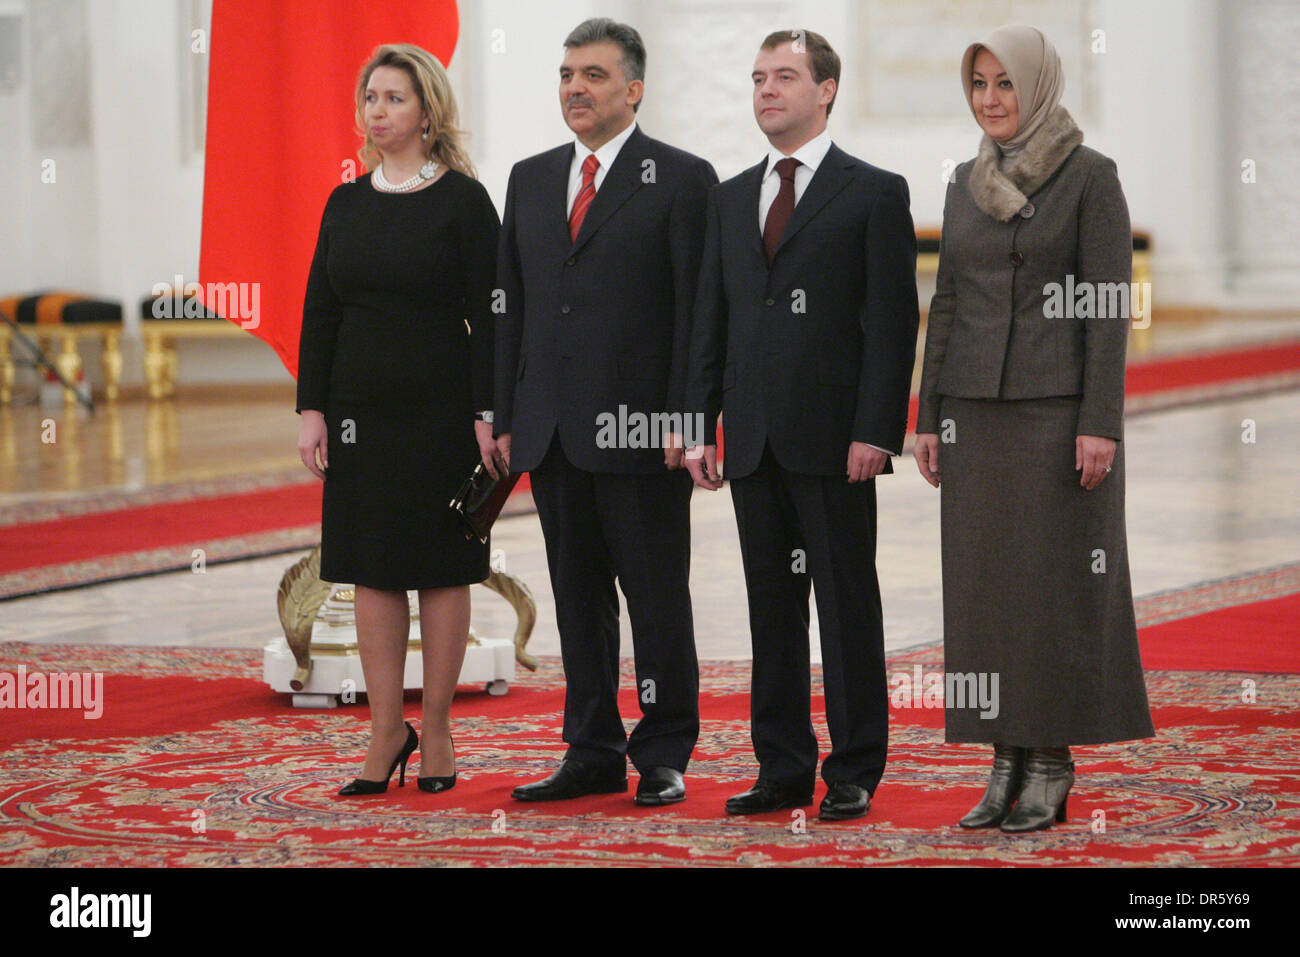 Feb 13, 2009 - Moscow, Russia - President of Russia DMITRY MEDVEDE and his wife SVETLANA MEDVEDEVA (L) at the meeting in Kremlin with Turkish President ABDULLAH GUL (2nd left) and Turkish president`s wife, HAYRUNNISA GUL. President of Russia Dmitry Medvedev and President of Turkey Abdullah Gul signed a joint declaration to promote a new stage in relations between Russia and Turkey  Stock Photo